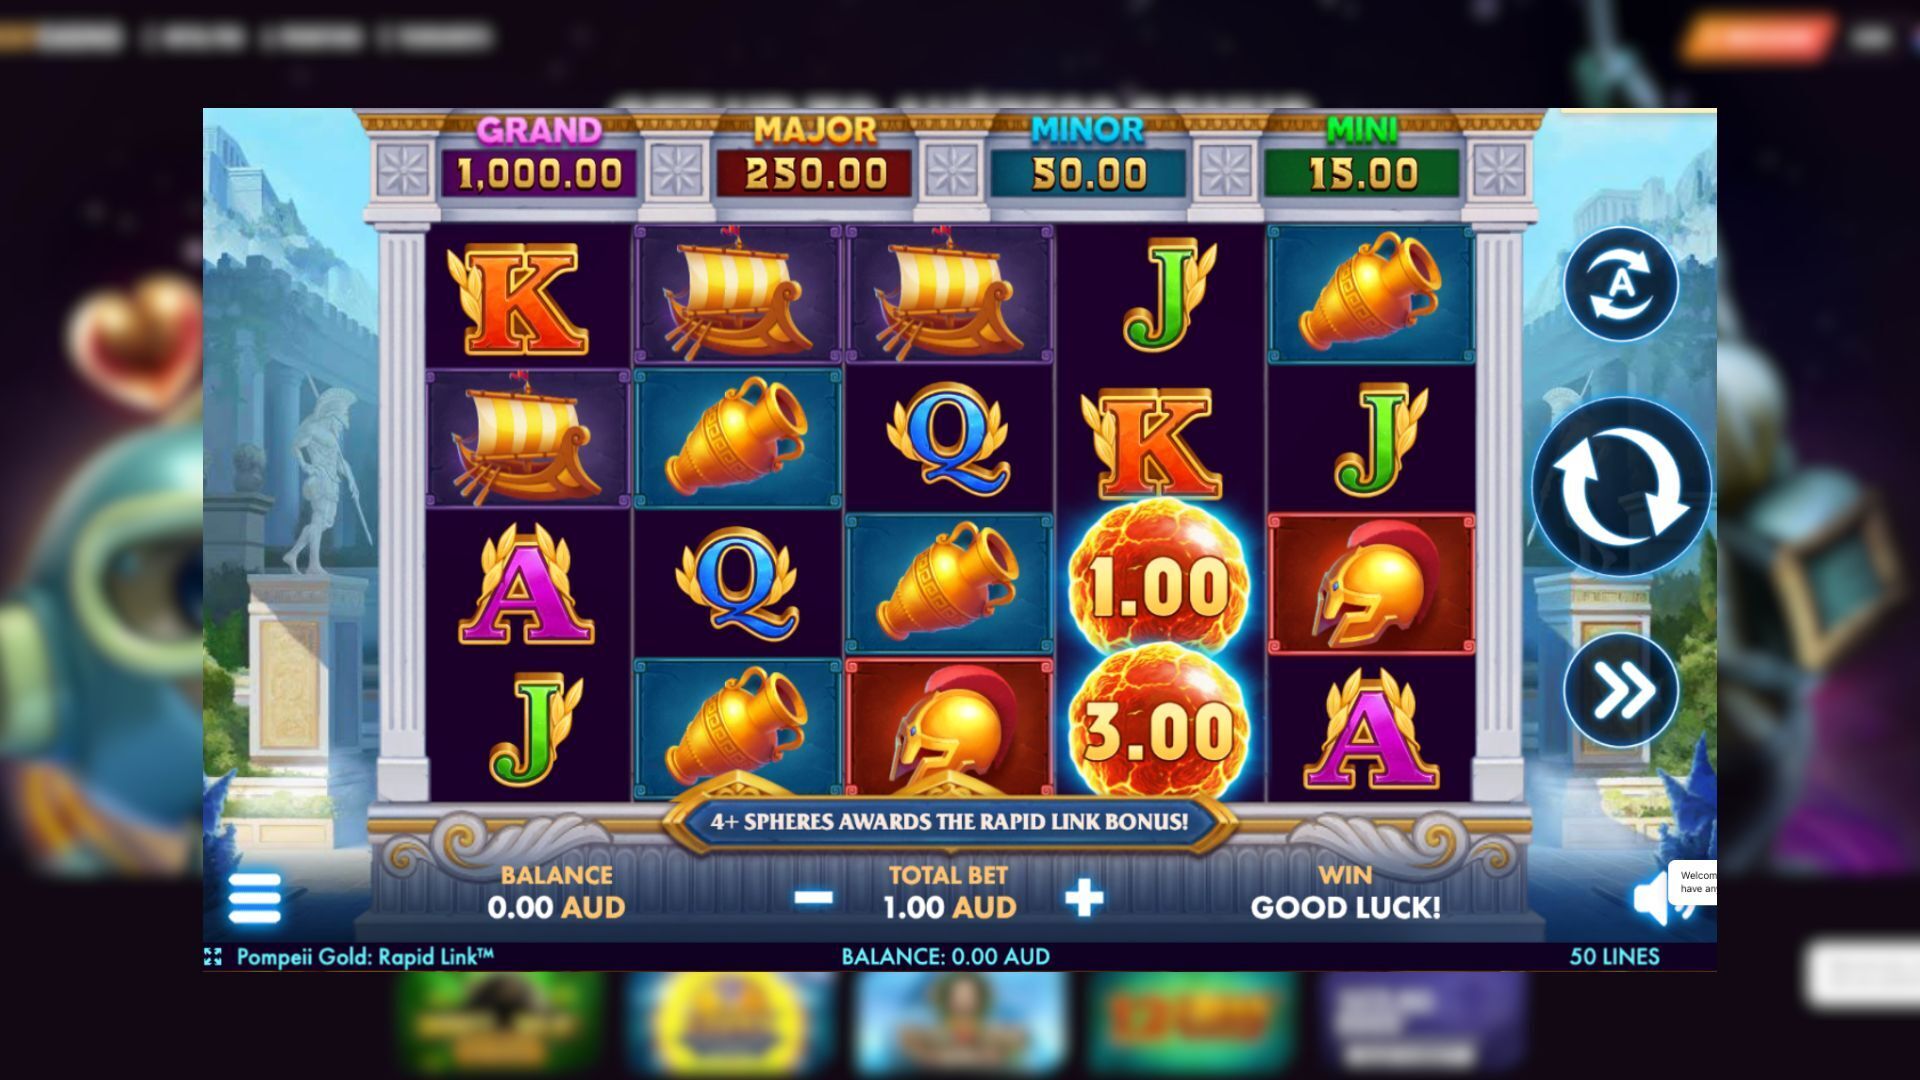 This is a screenshot of the Pompeii Gold Pokies Game at Ricky Casino in Australia